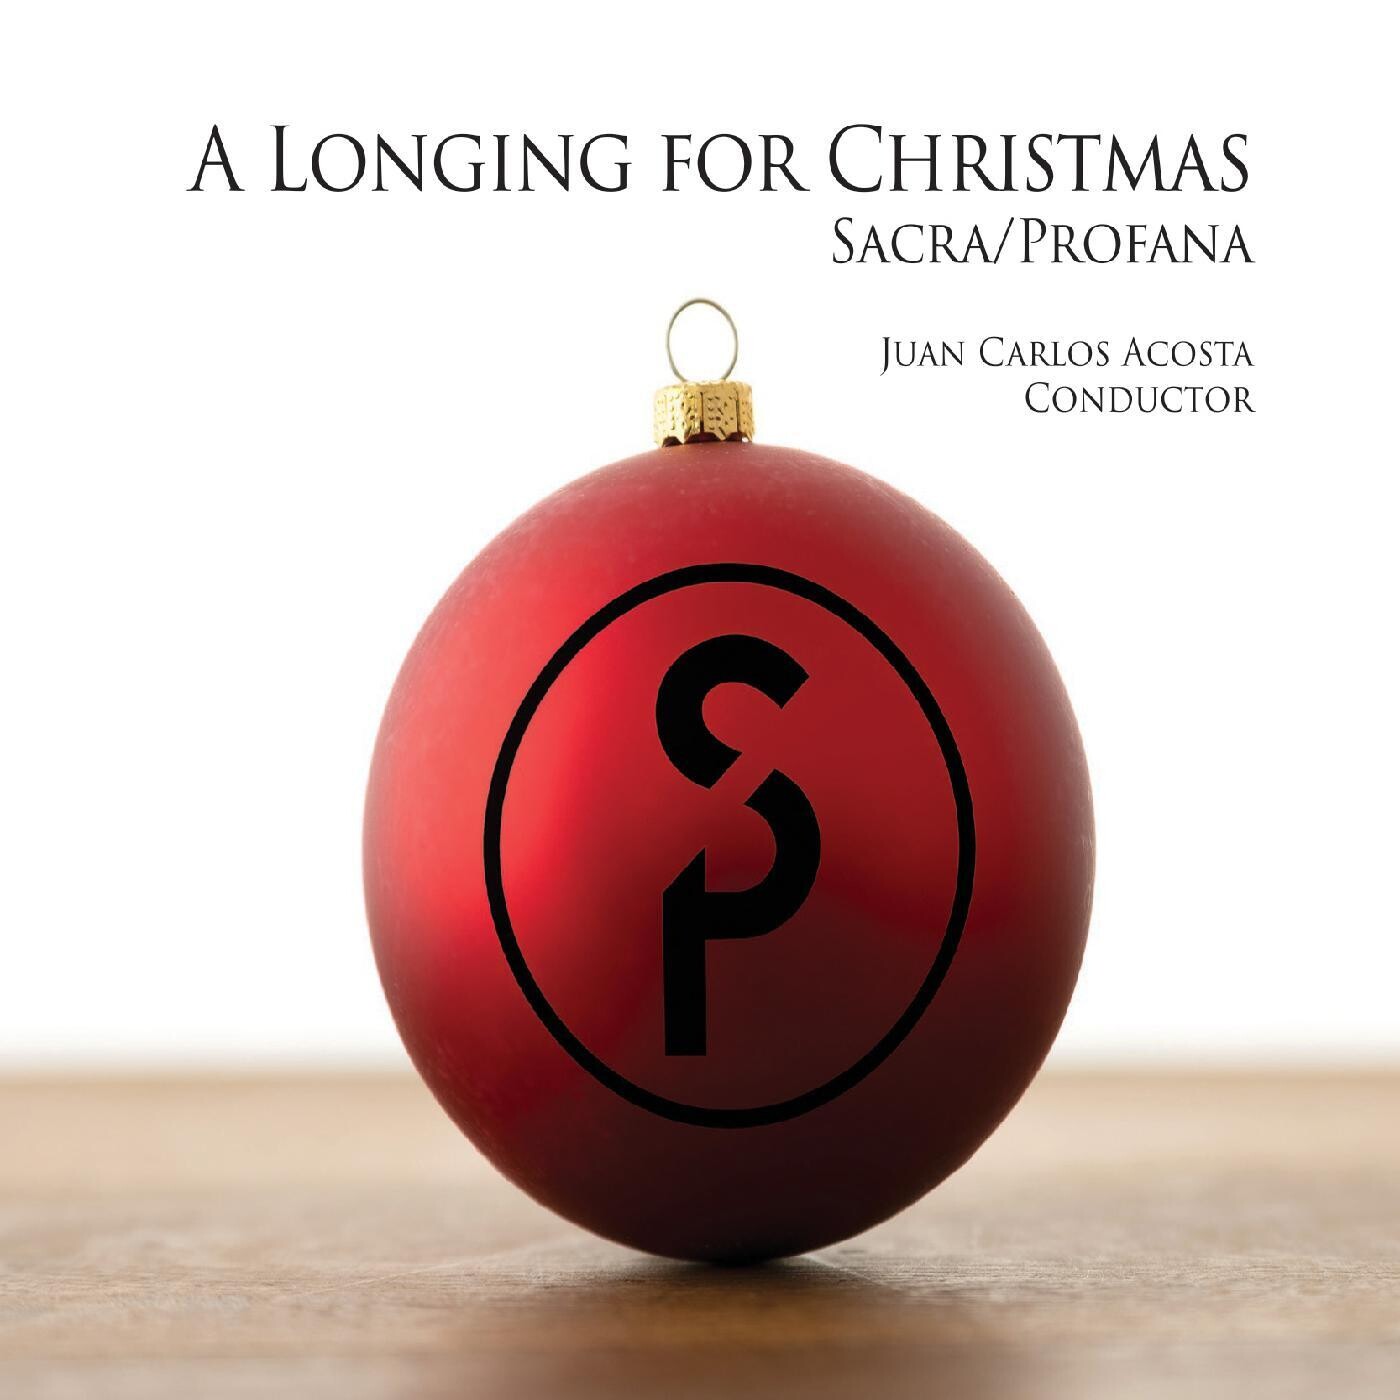 A Longing for Christmas CD